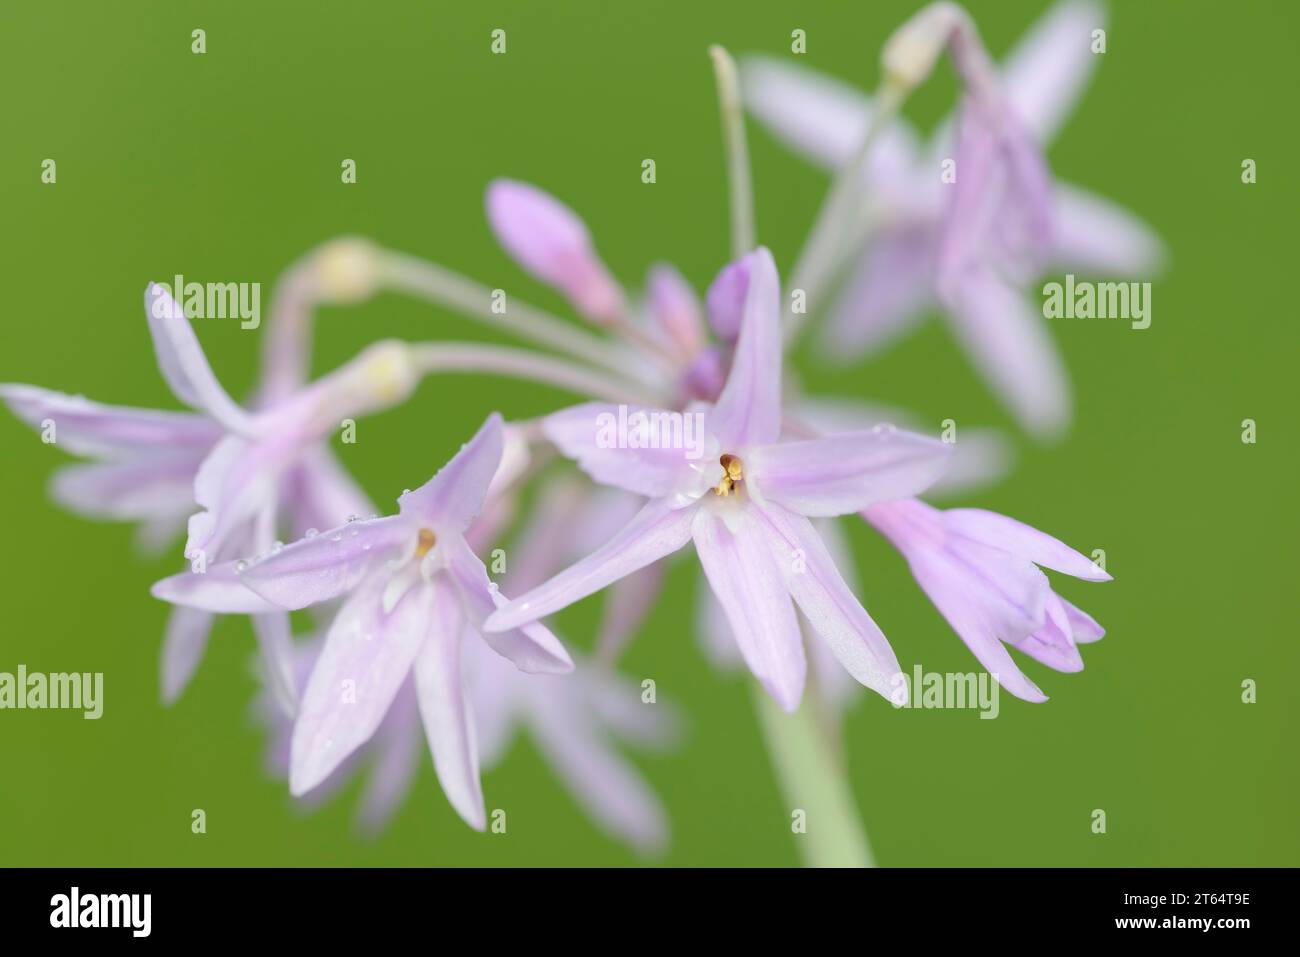 Cape lily (Tulbaghia violacea), flowers, occurrence in South Africa, North Rhine-Westphalia, Germany Stock Photo